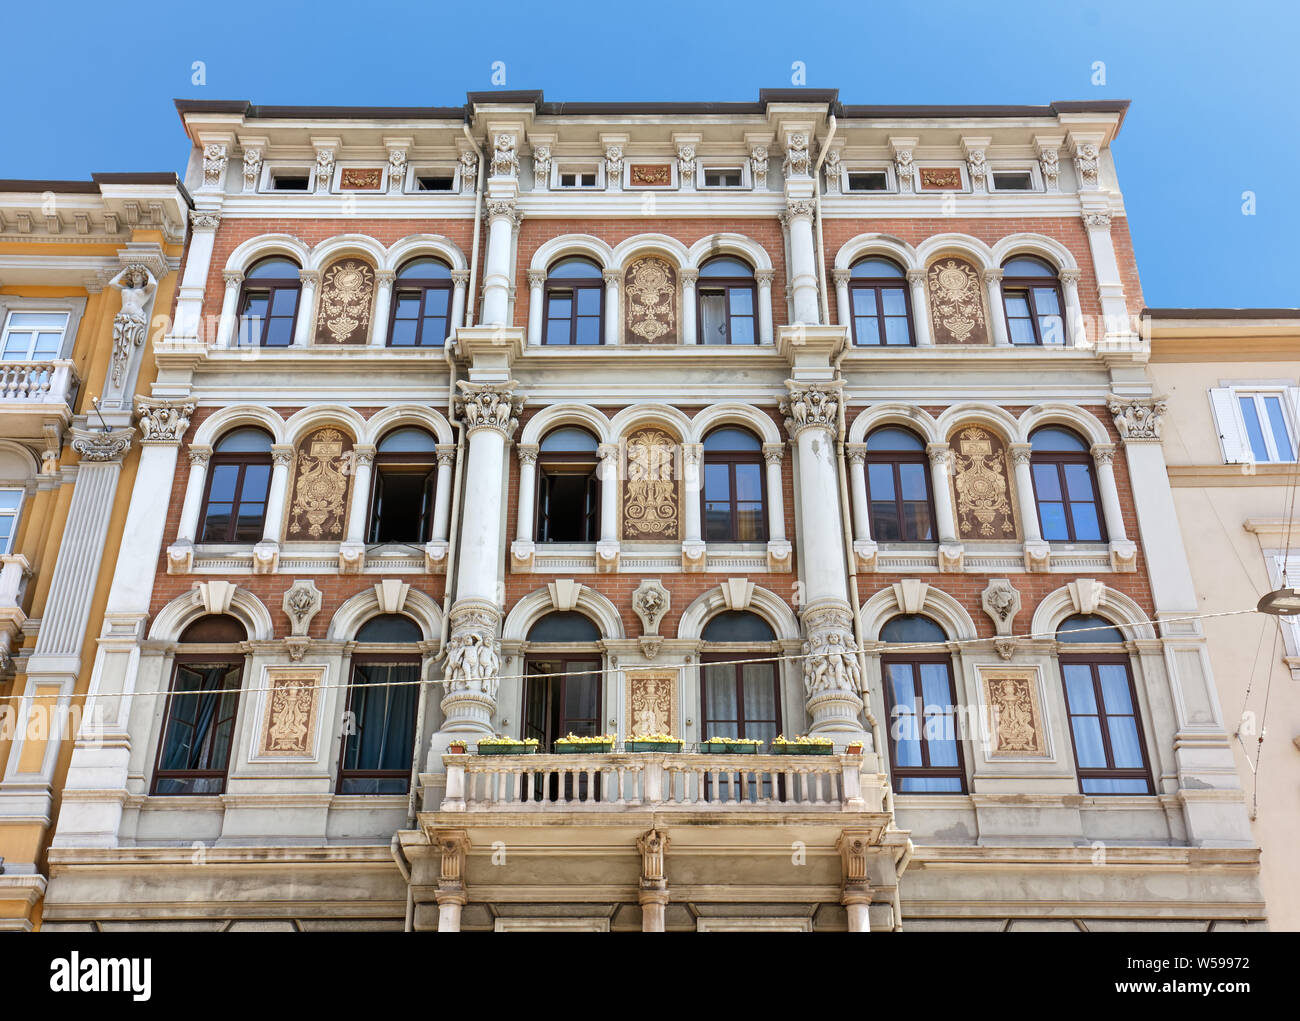 TRIESTE, Italy - June 16, 2019: Richly decorated exterior facade of an elegant historic building in Carducci street Stock Photo